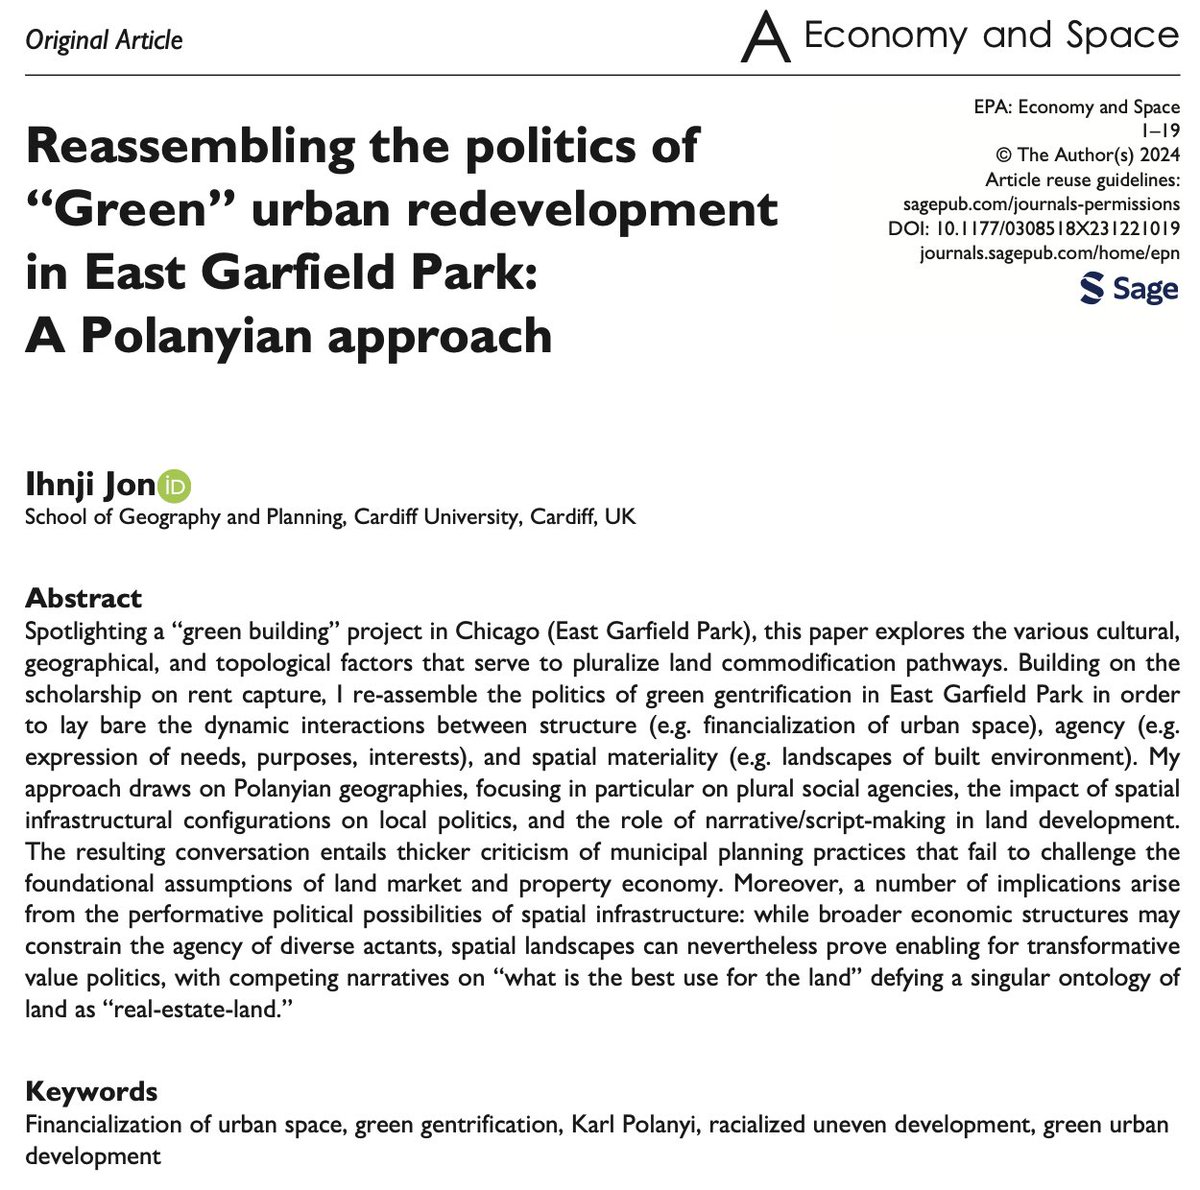 it's live !! my first article in my dream journal @economyandspace (thank you so much @outtaKimbo !!!) Reassembling the politics of “Green” urban redevelopment in East Garfield Park: A Polanyian approach doi.org/10.1177/030851…